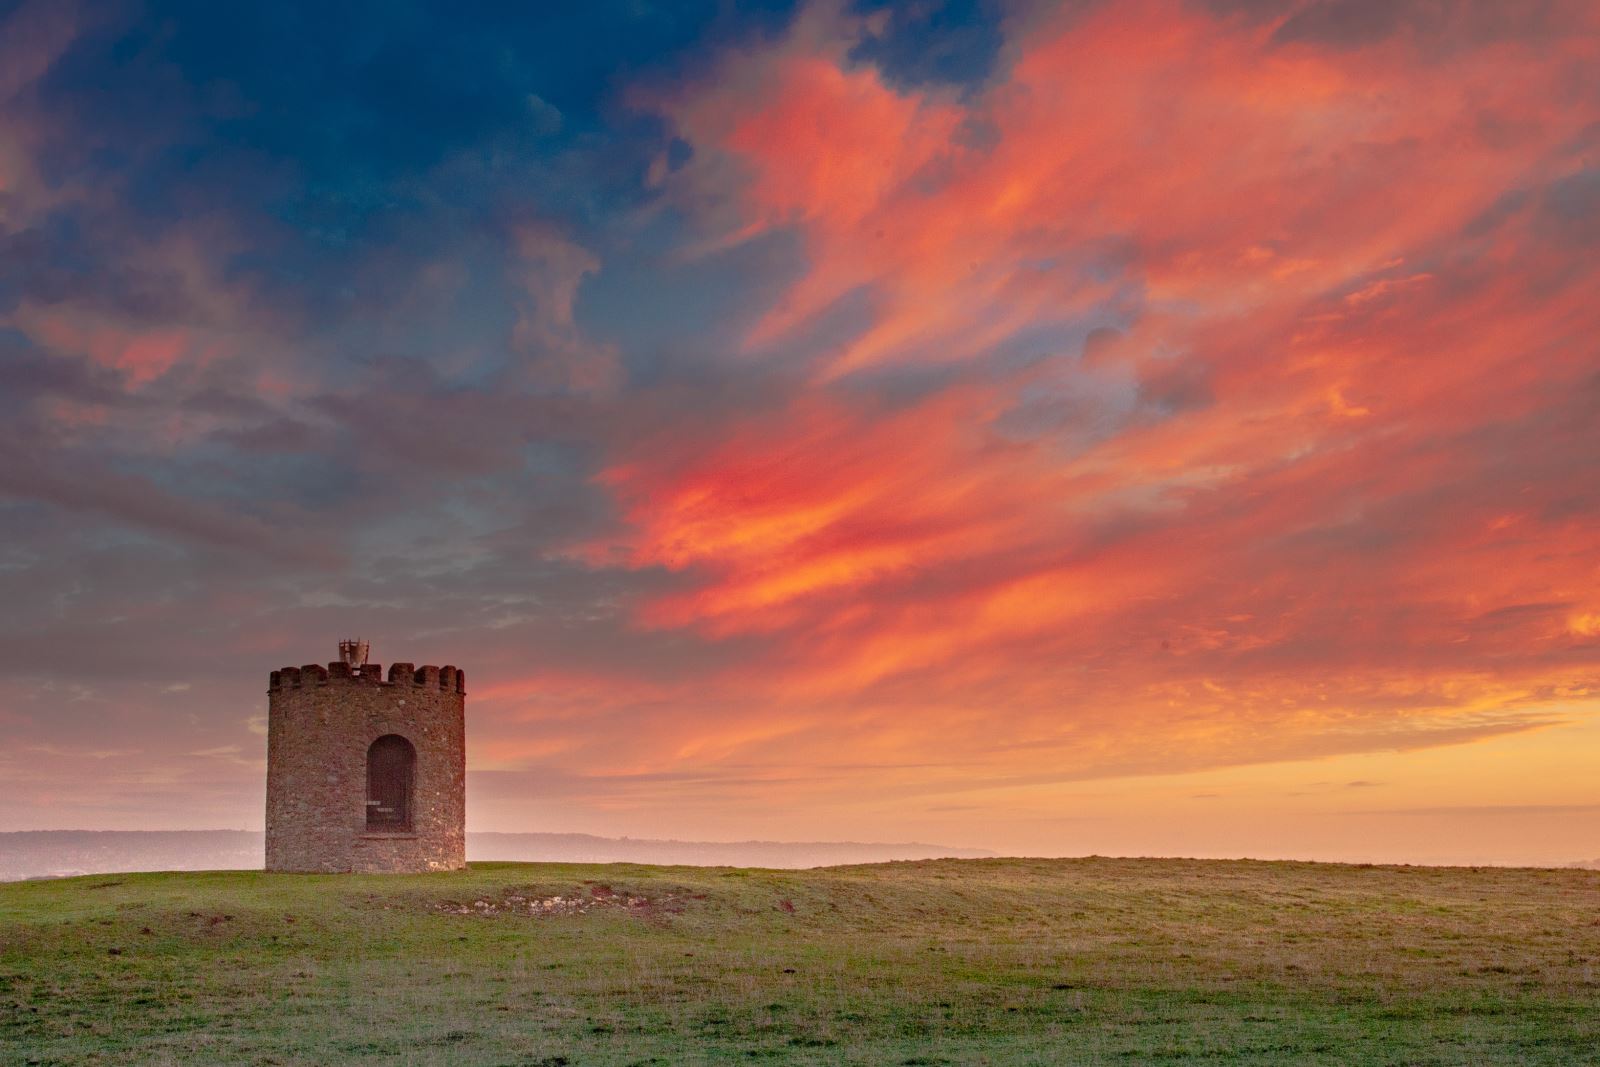 A stone beacon on a hill  under a blue, orange and red sky at sunrise